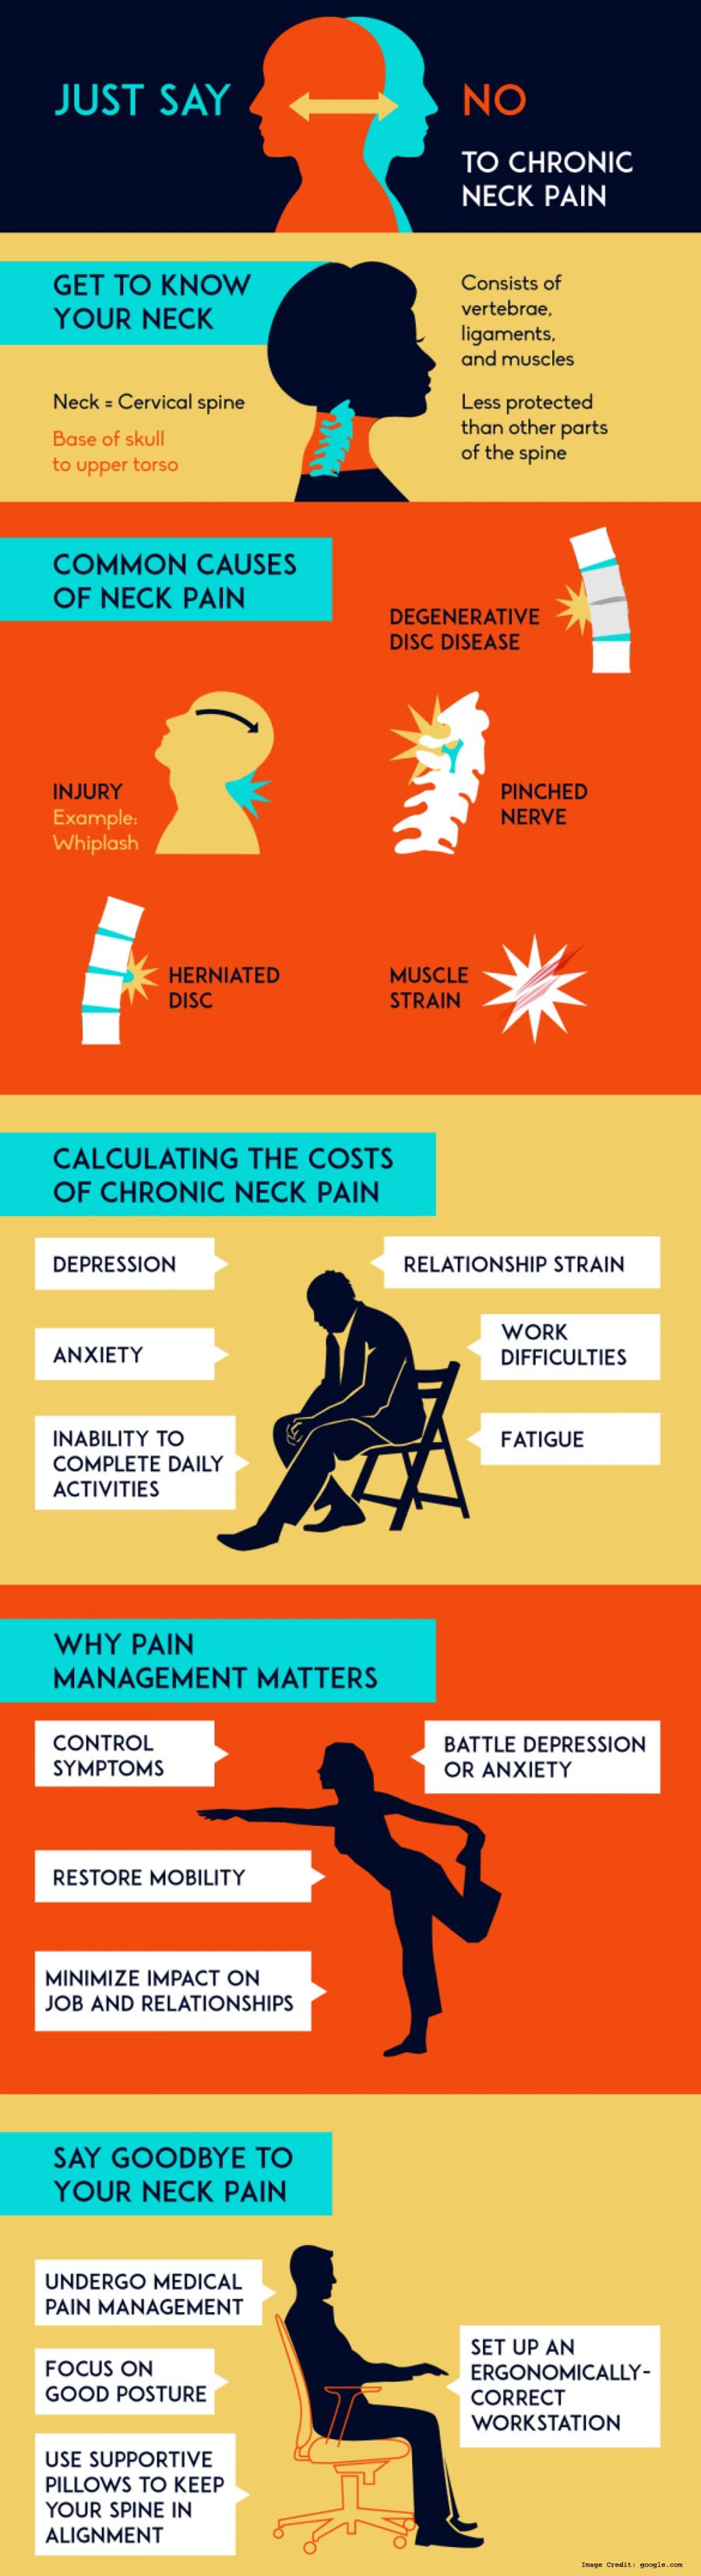 Chronic Neck Pain Common Causes And Reasons - vrogue.co